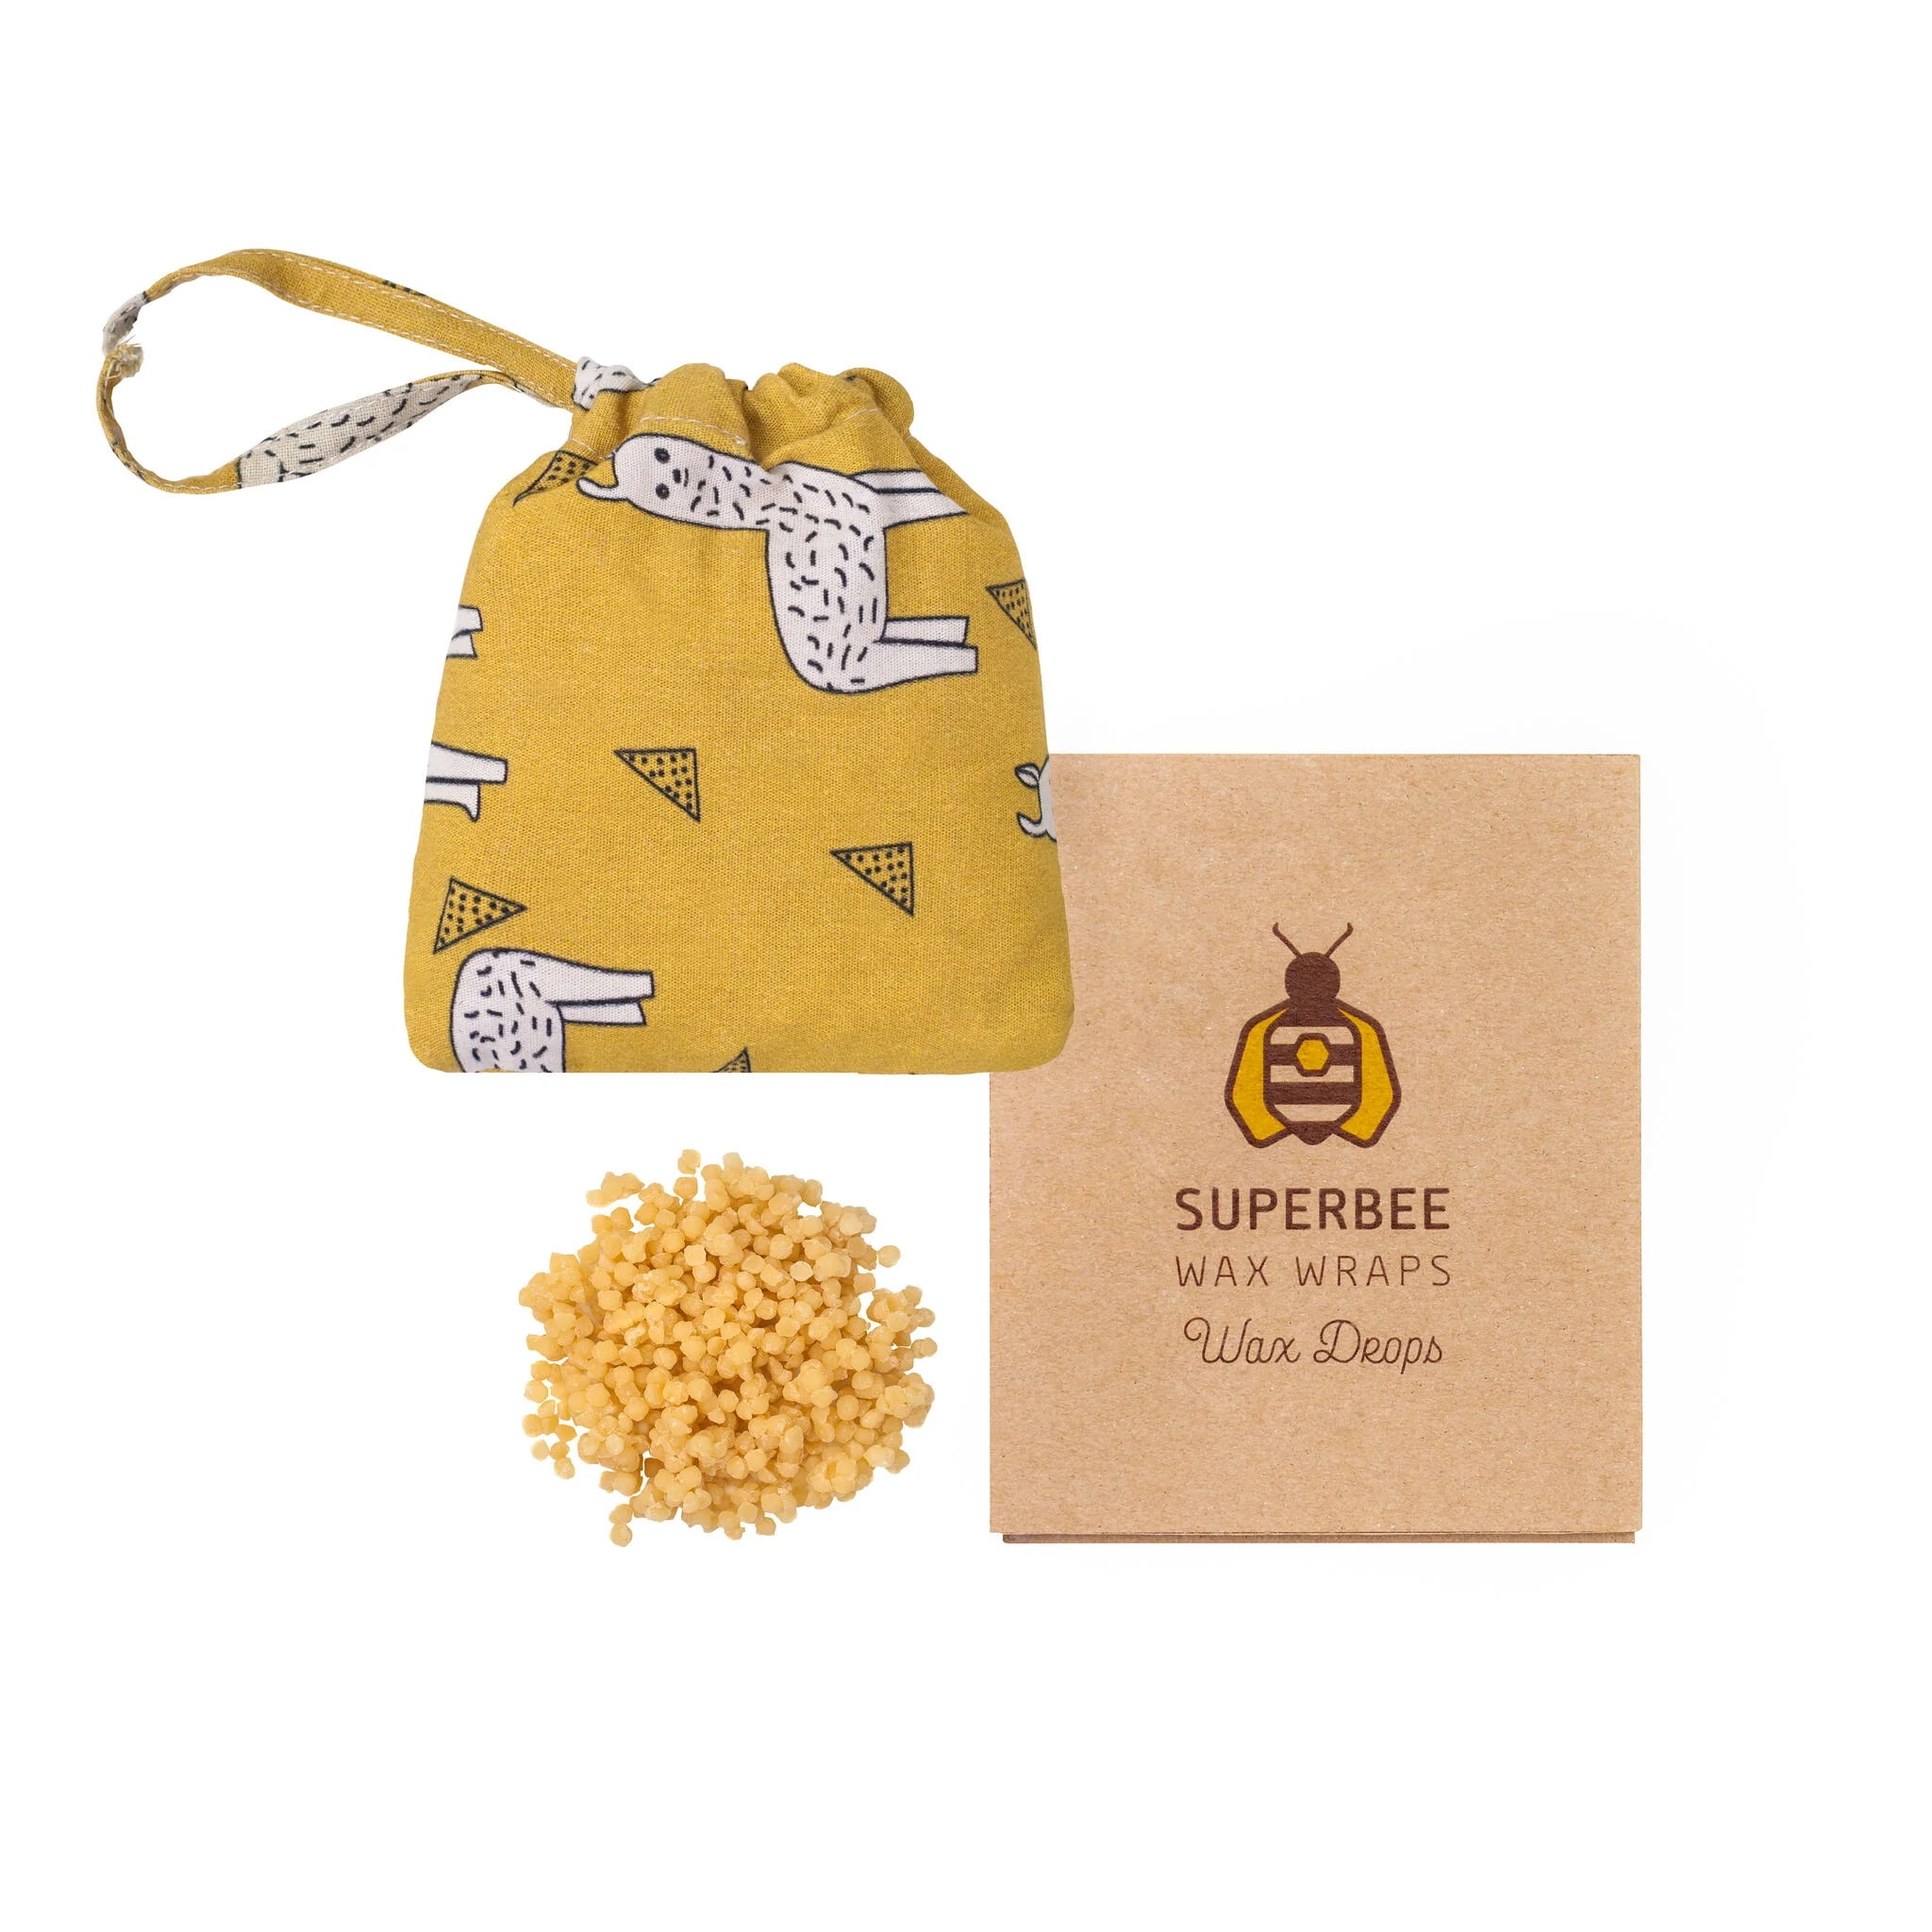 SUPERBEE Beeswax Wrap for Food, Set of 3 Bees Wax Wraps, Reusable